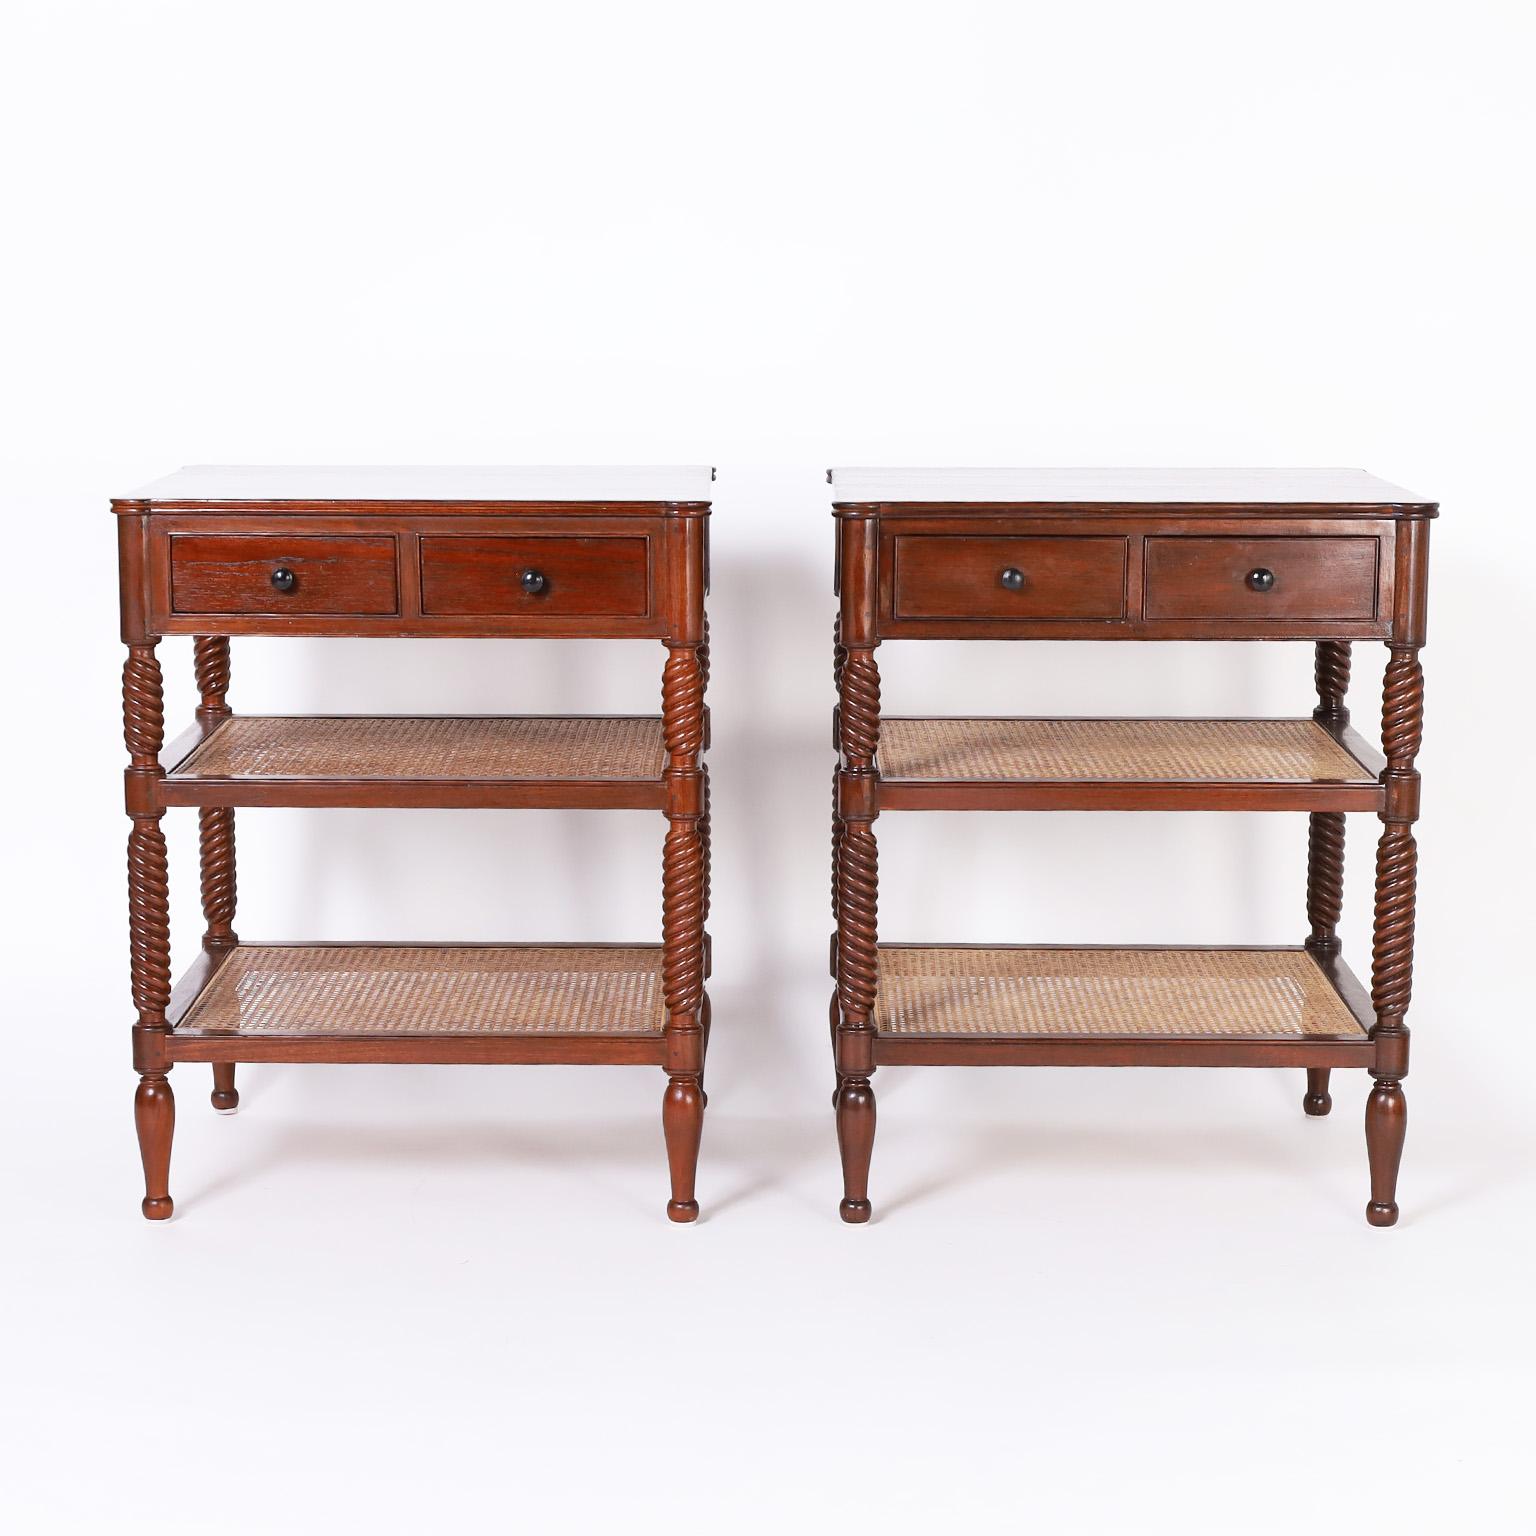 Pair of British colonial style stands crafted in mahogany with two drawers in the top case, two lower caned tiers with elegant turned supports and legs.